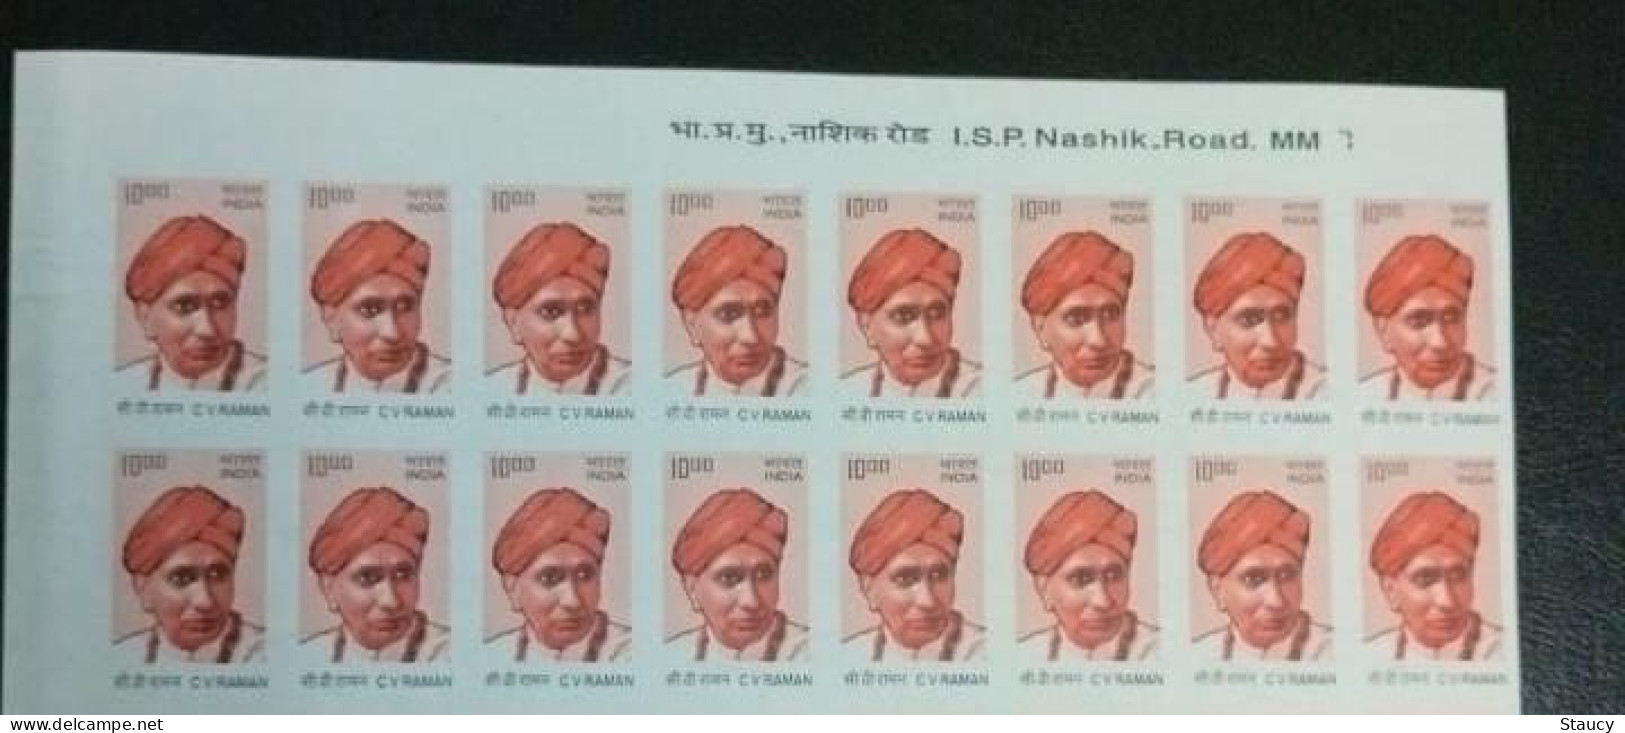 INDIA 2008 Error 10th. Definitive Series C V Raman MNH Error Block Of 16 Stamps "IMPERF" As Per Scan - Fehldrucke